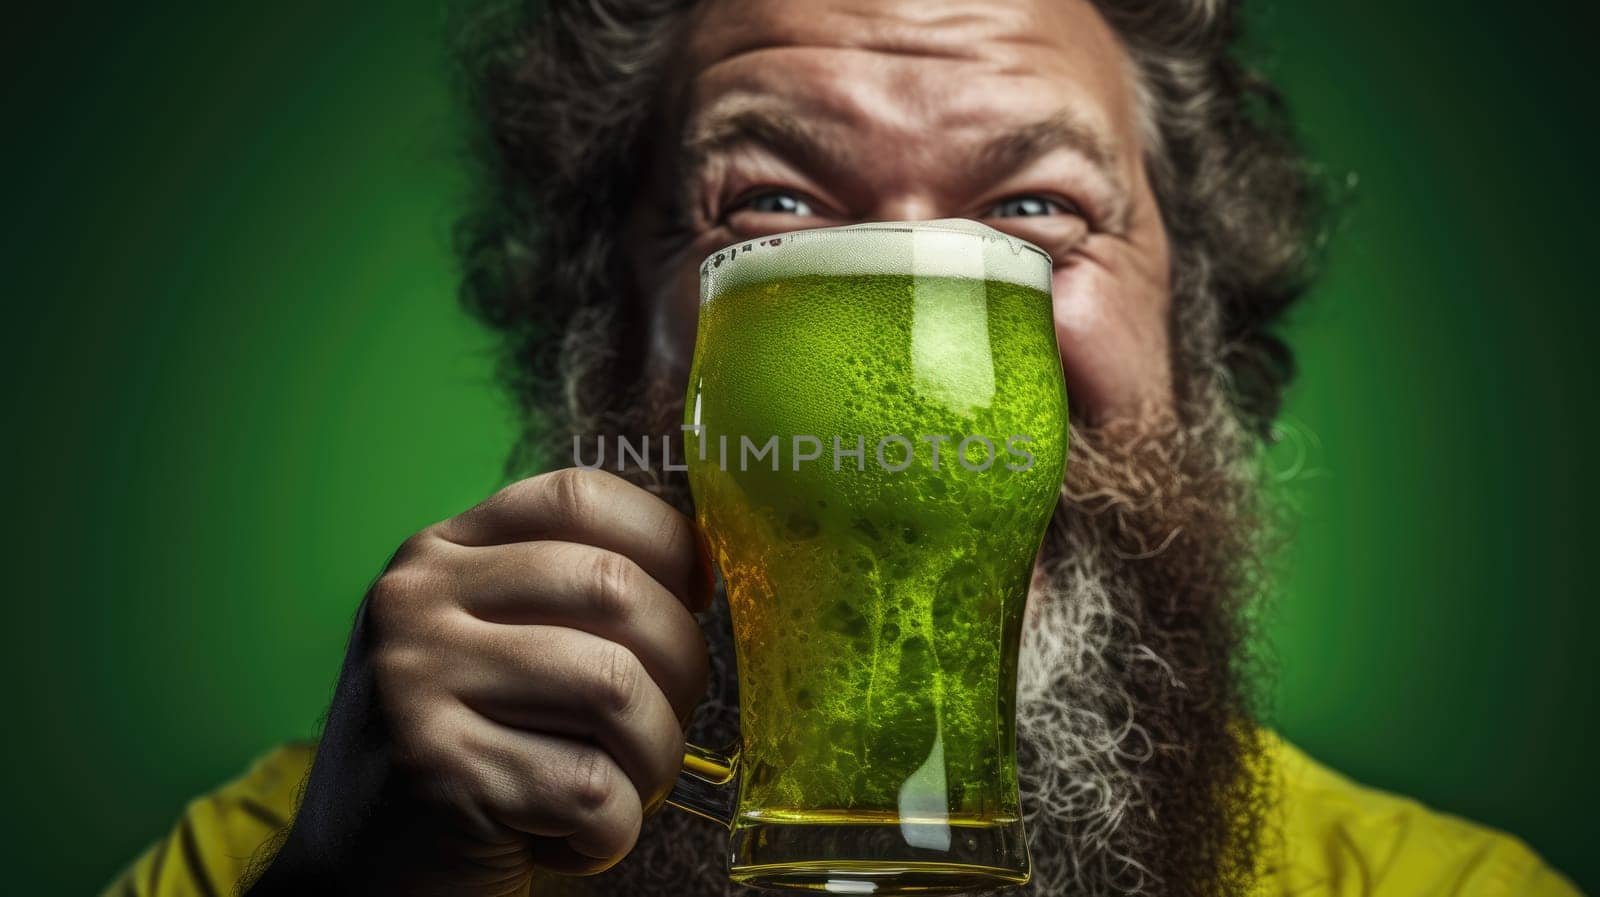 Bearded man in green shirt holding glass of green beer, happy expression. The man is outdoors with a blurred background. The beer is held in his right hand, partially covered by his beard.